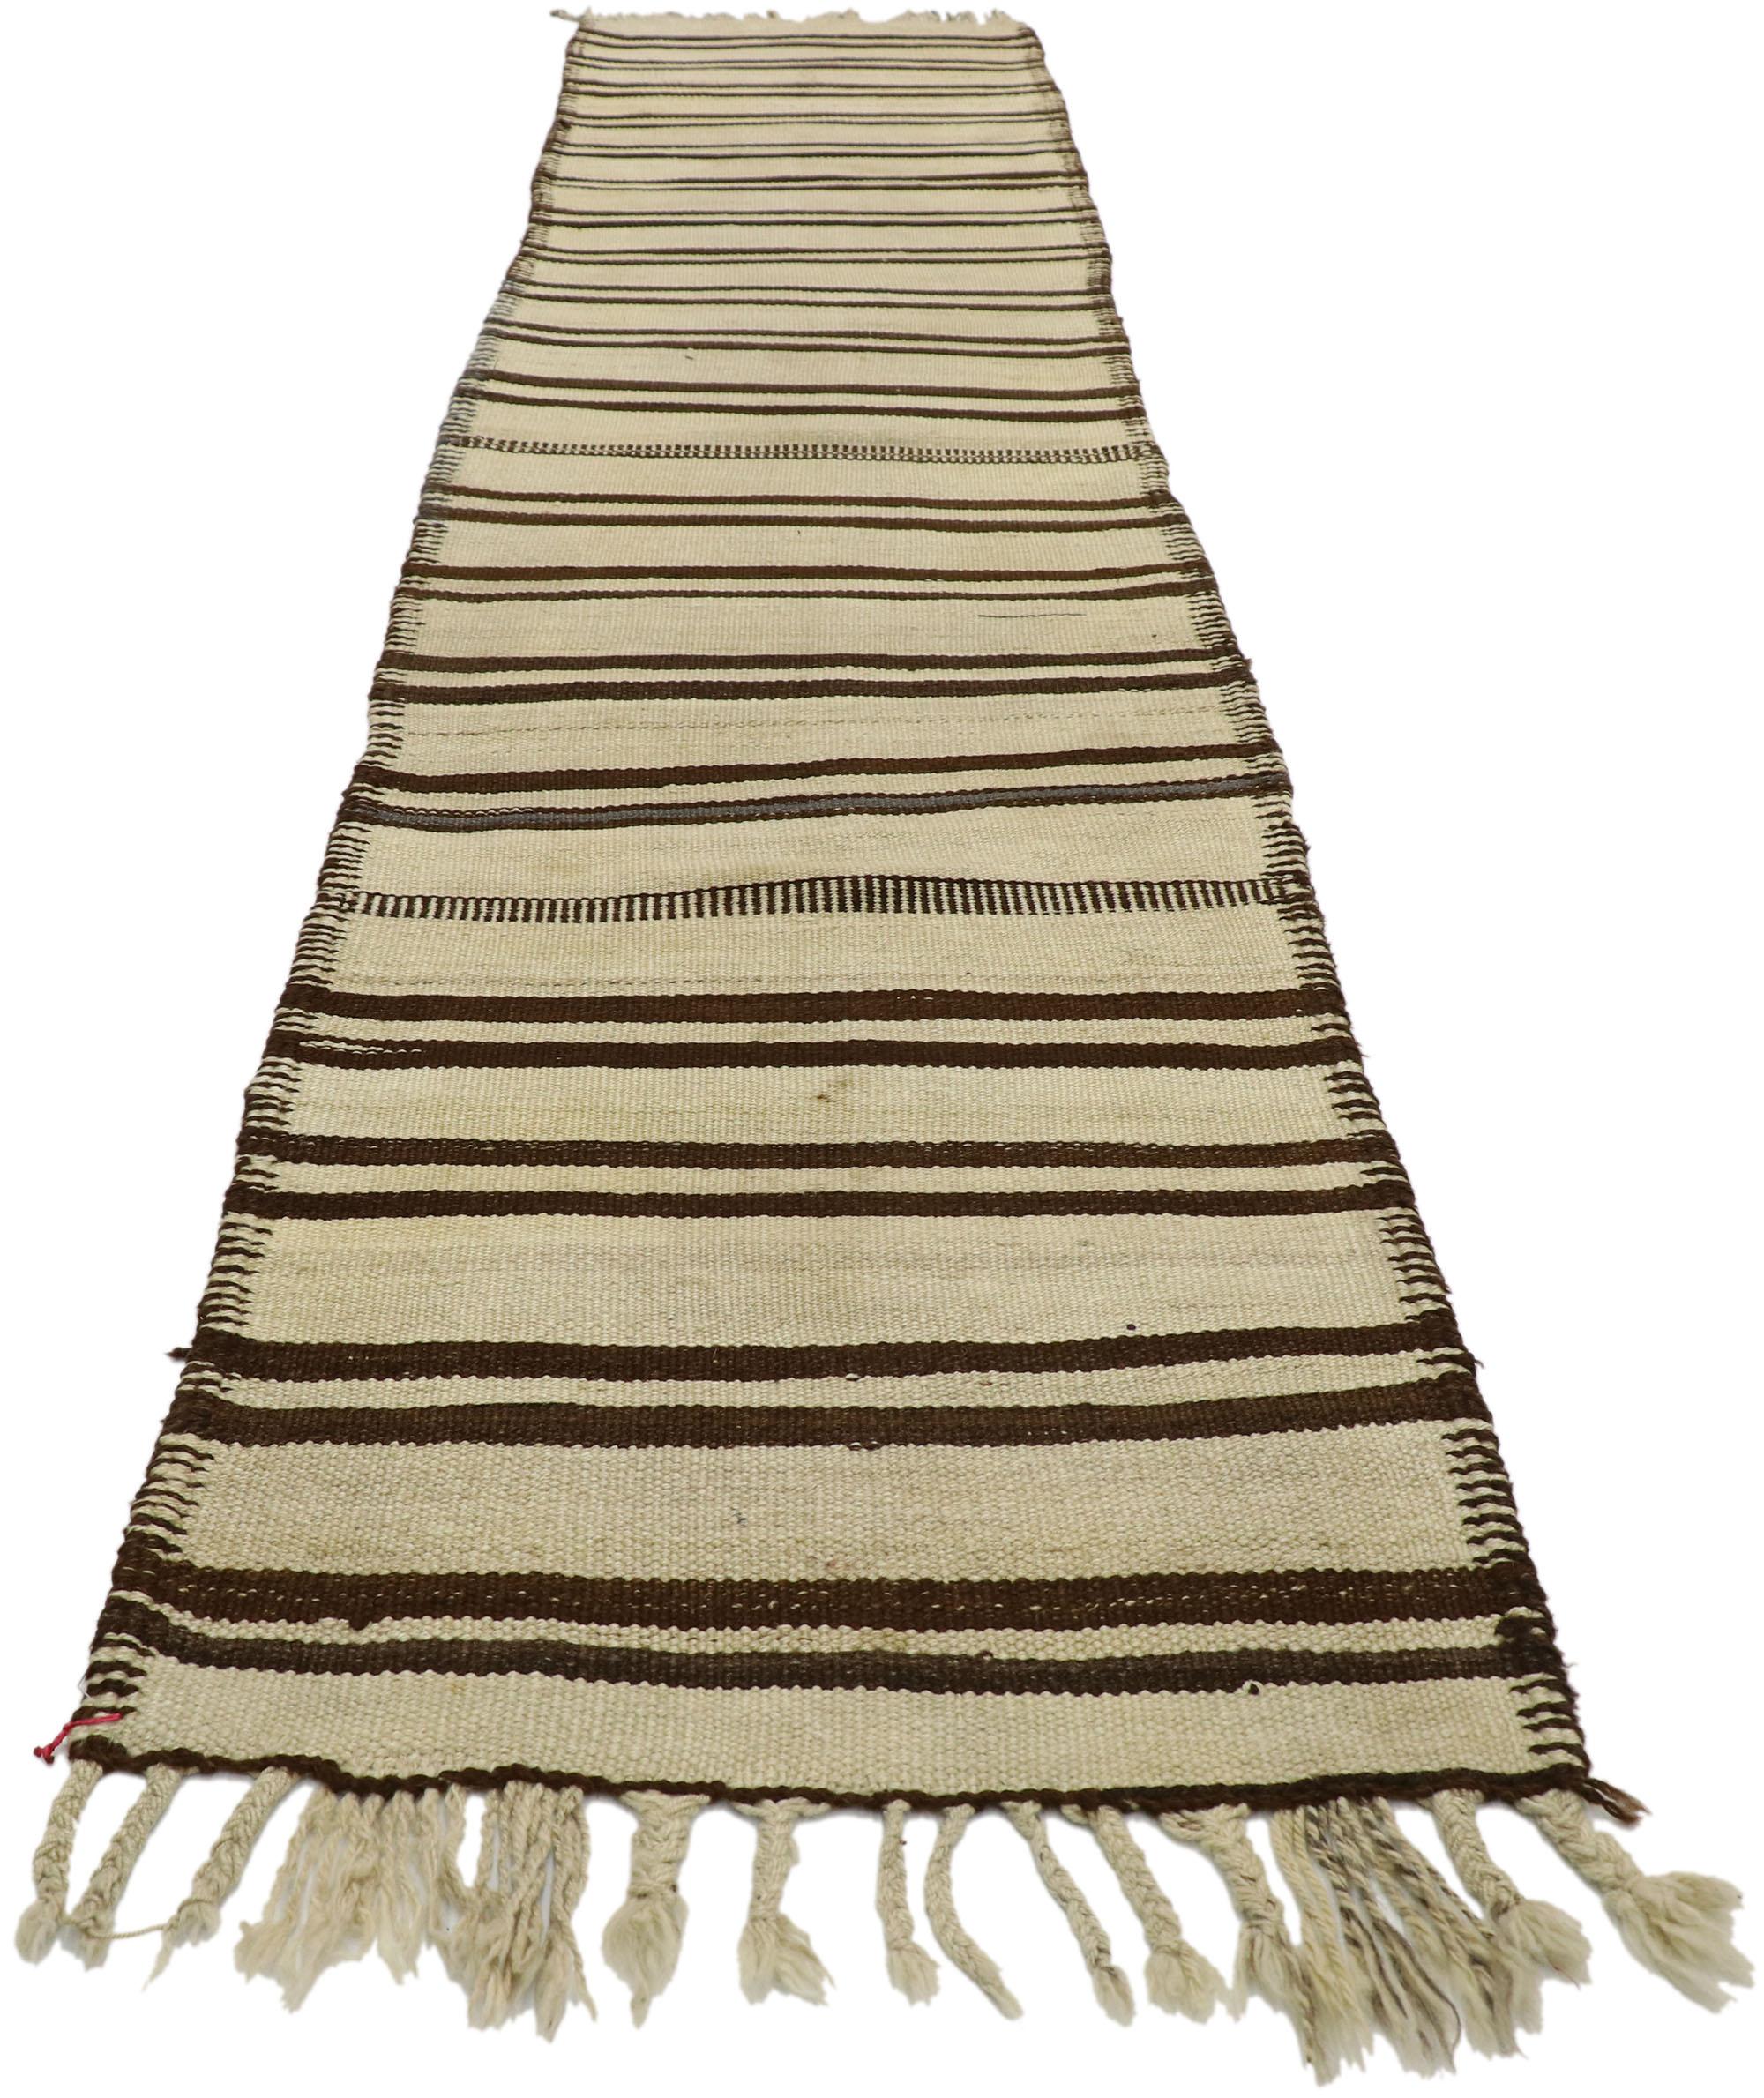 Hand-Woven Vintage Turkish Striped Kilim Runner with Modern Style